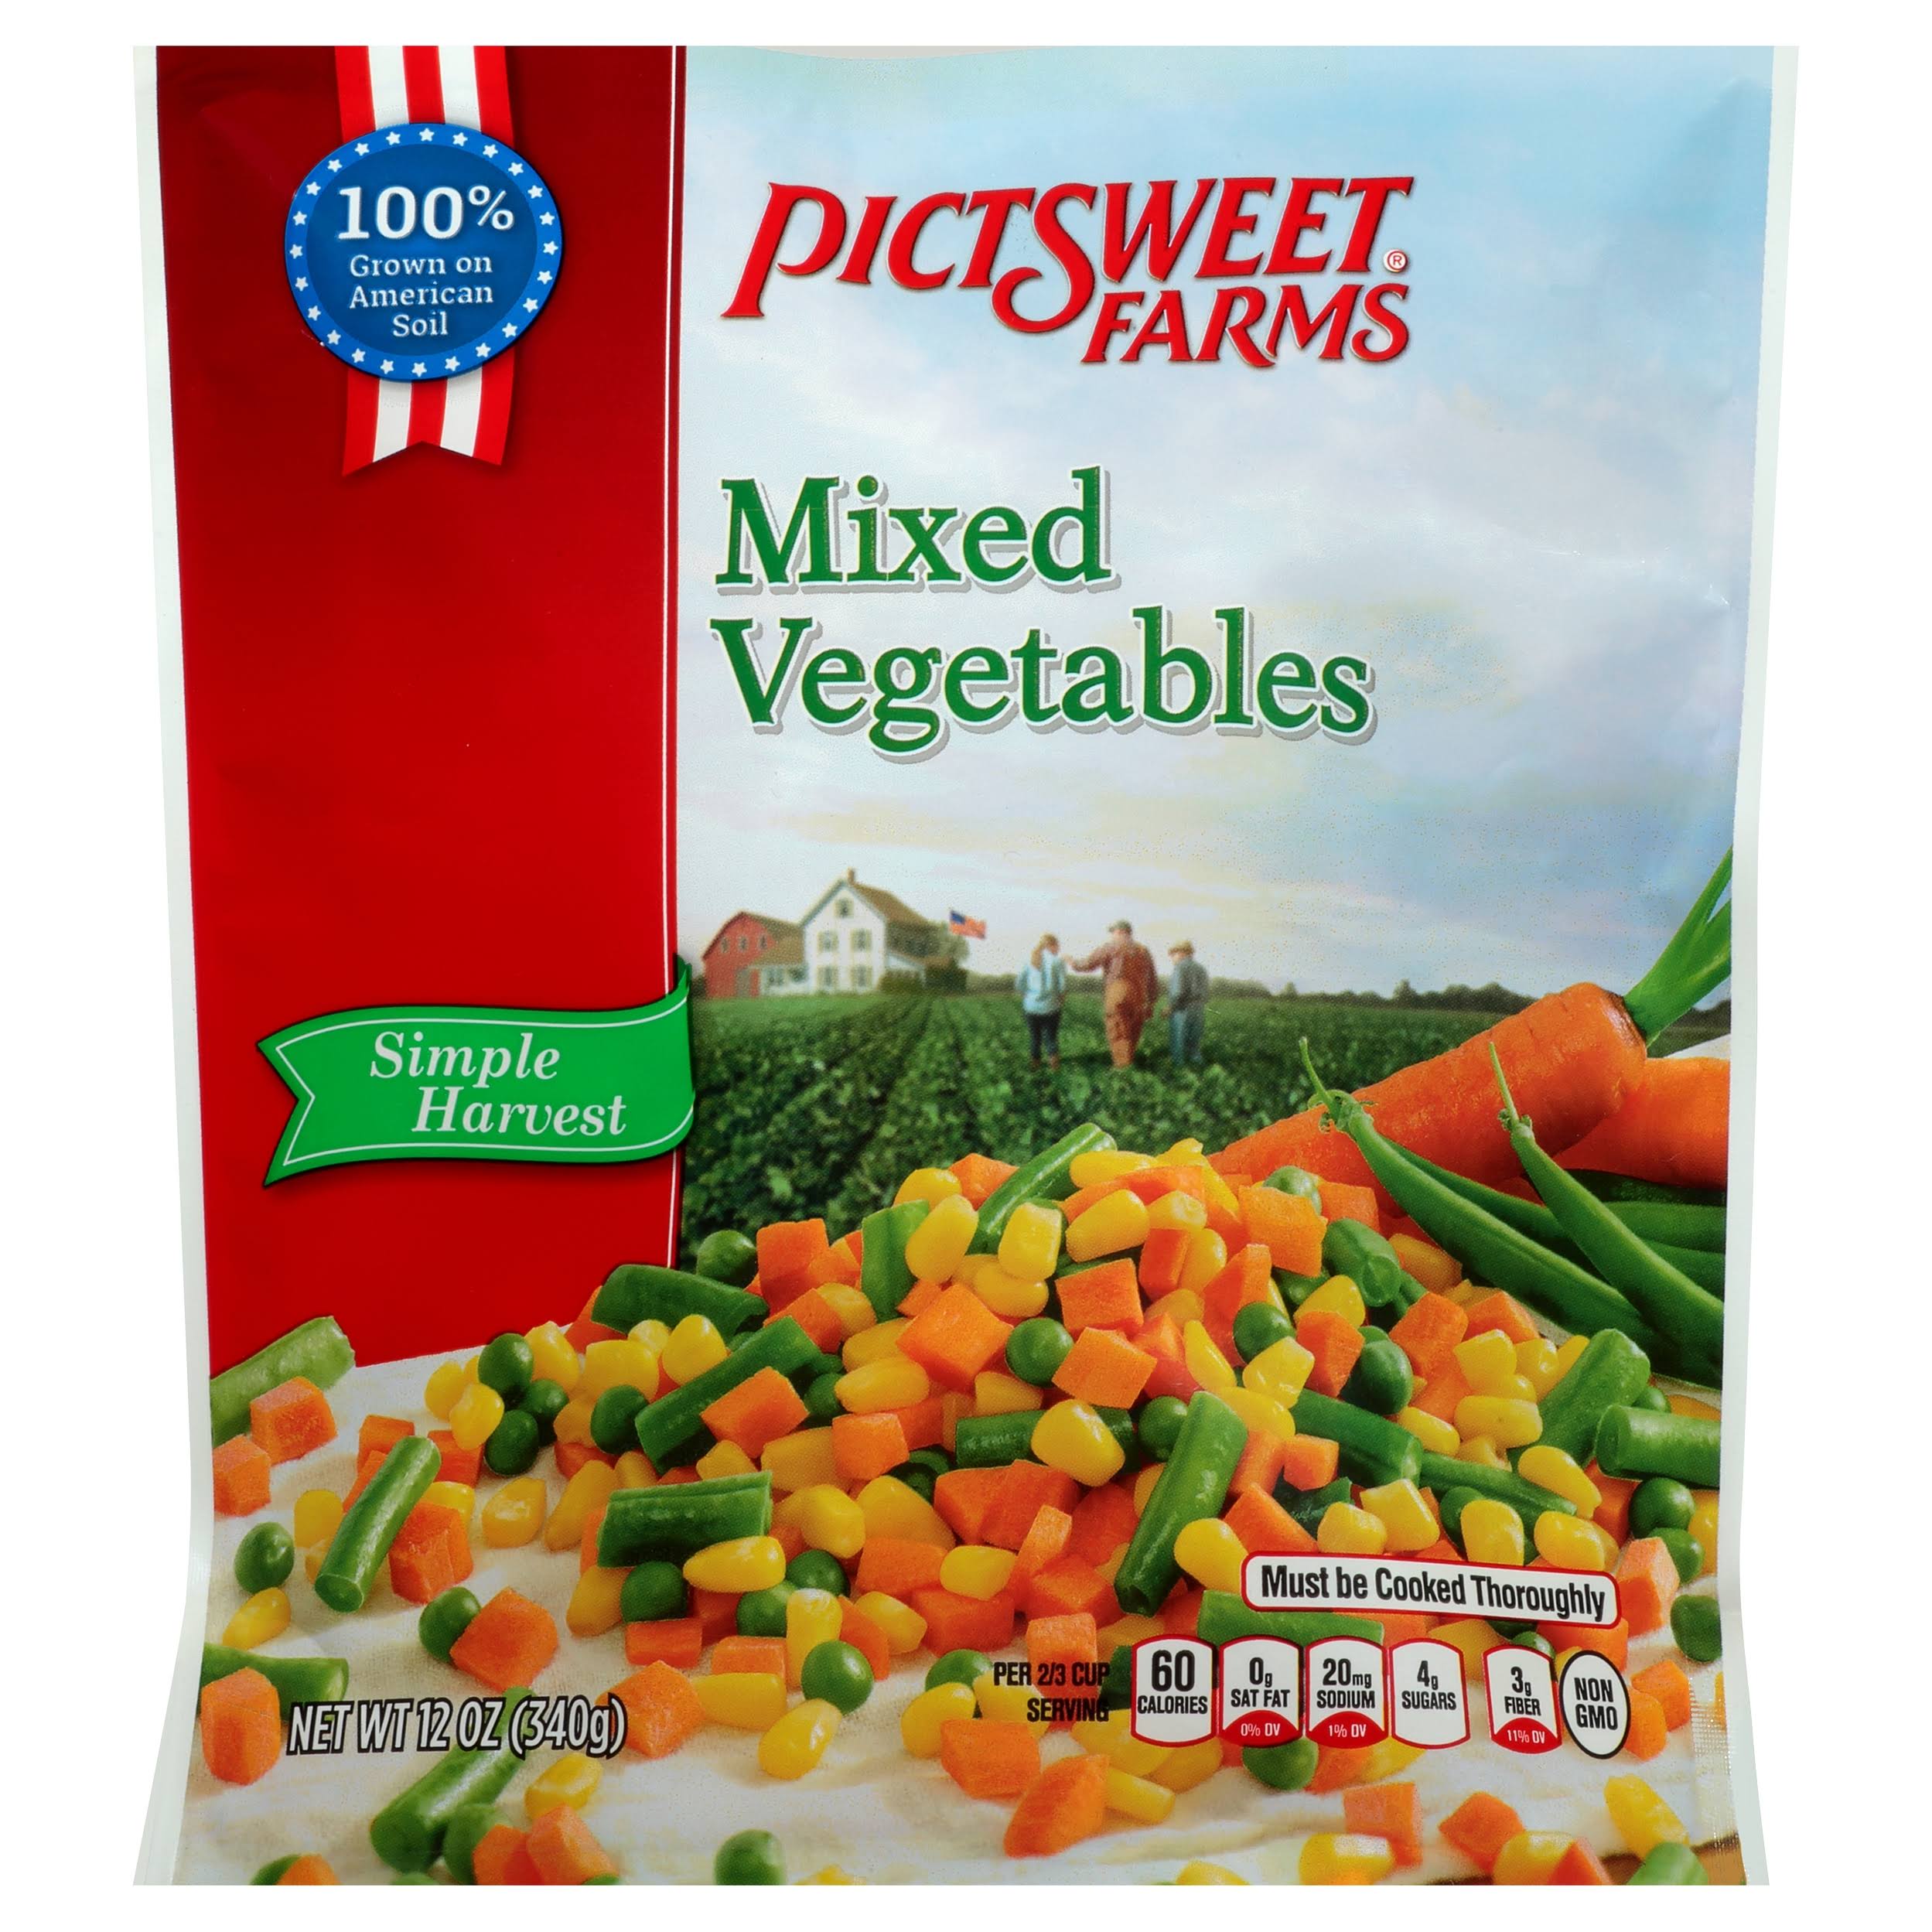 Pictsweet Mixed Vegetables - 12oz